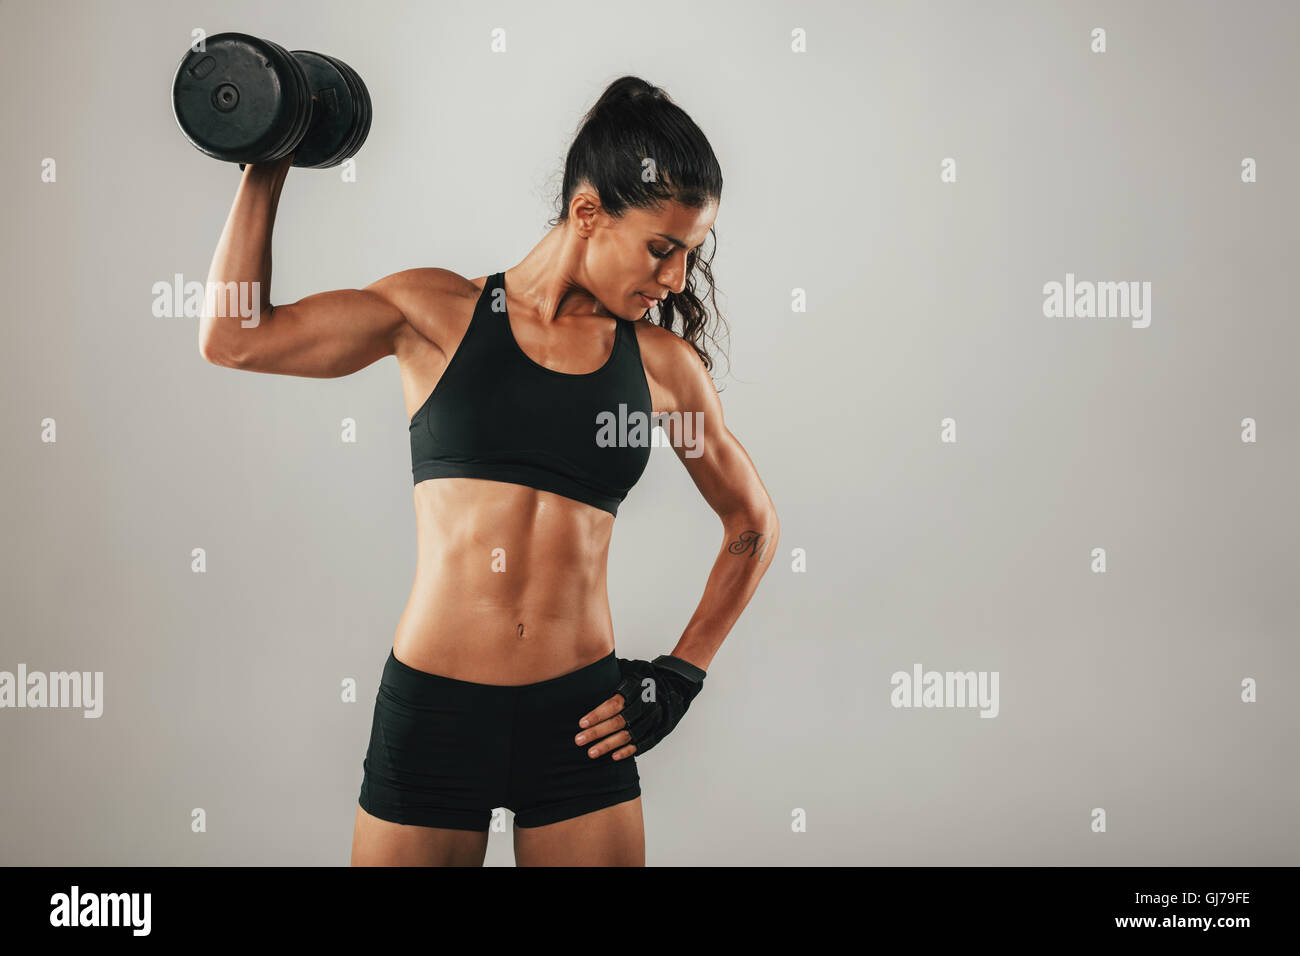 Toned muscular young woman working out with weights raising a